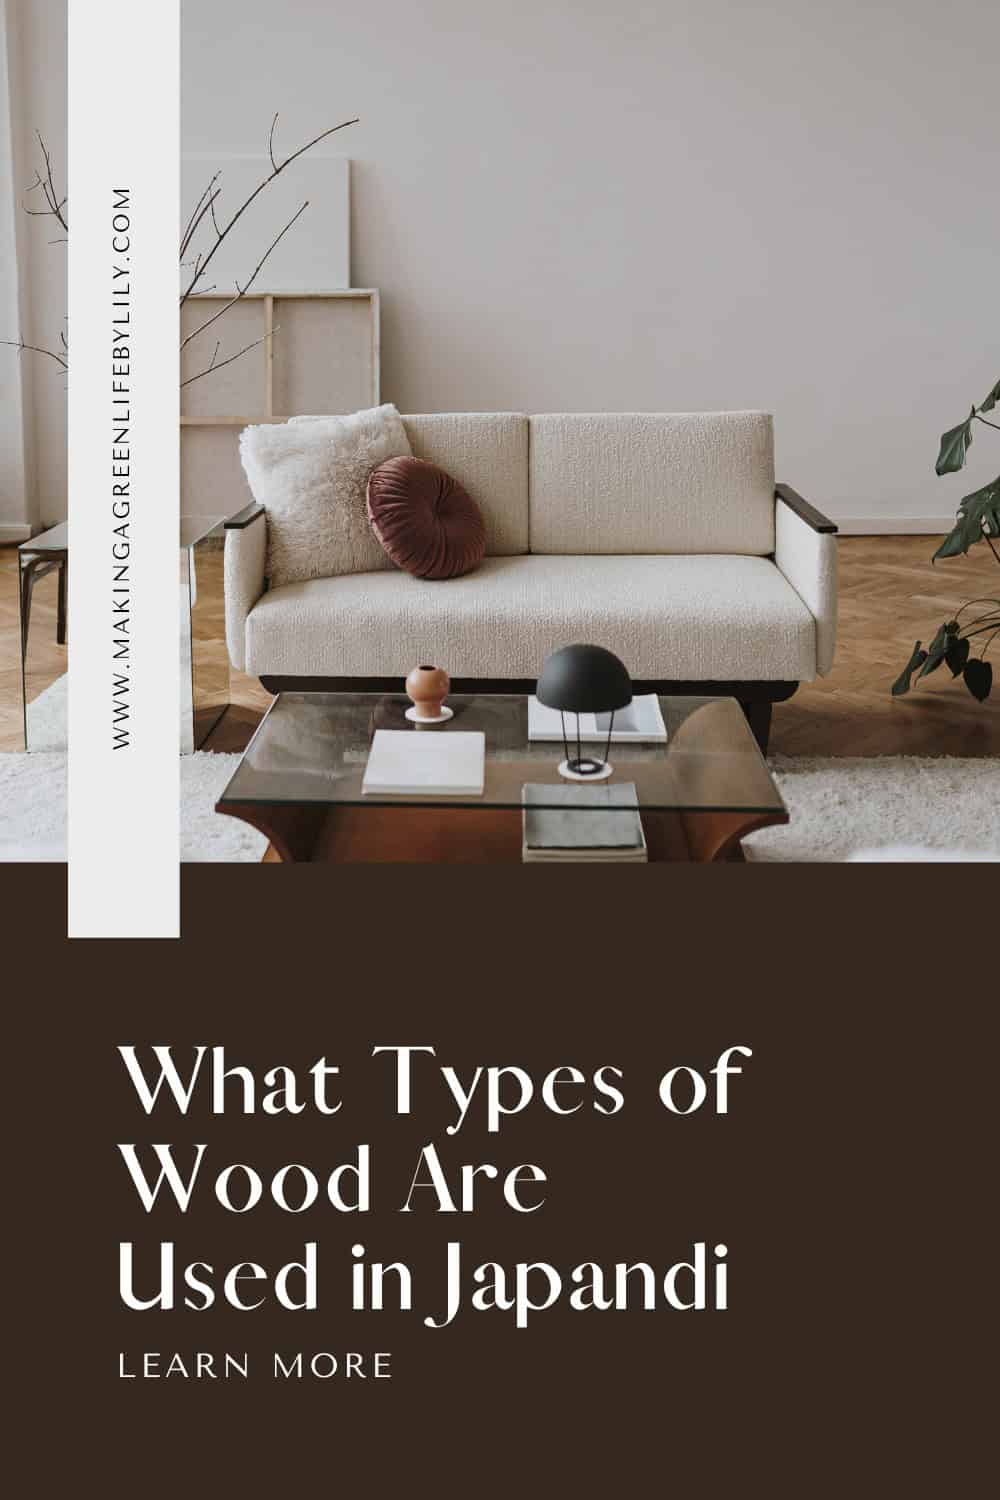 What Types of Wood Are Used in japandi